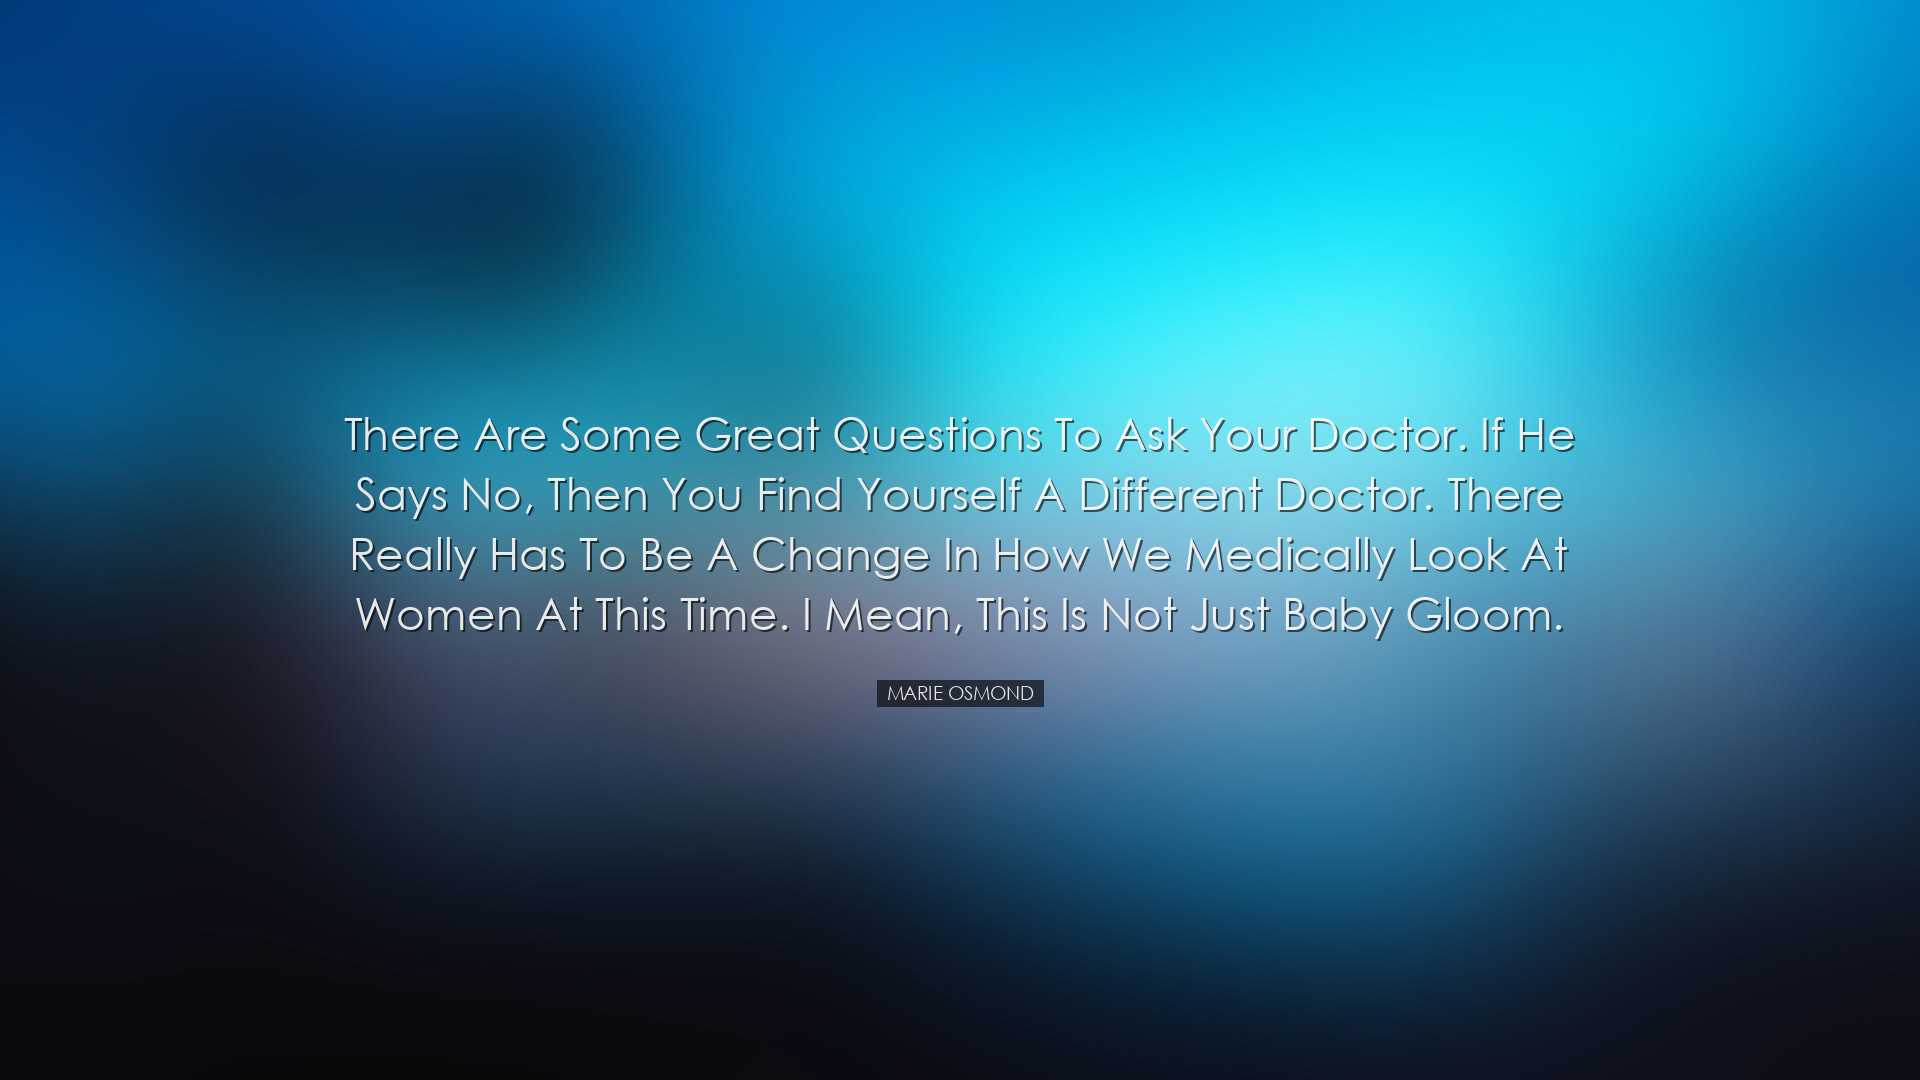 There are some great questions to ask your doctor. If he says no,